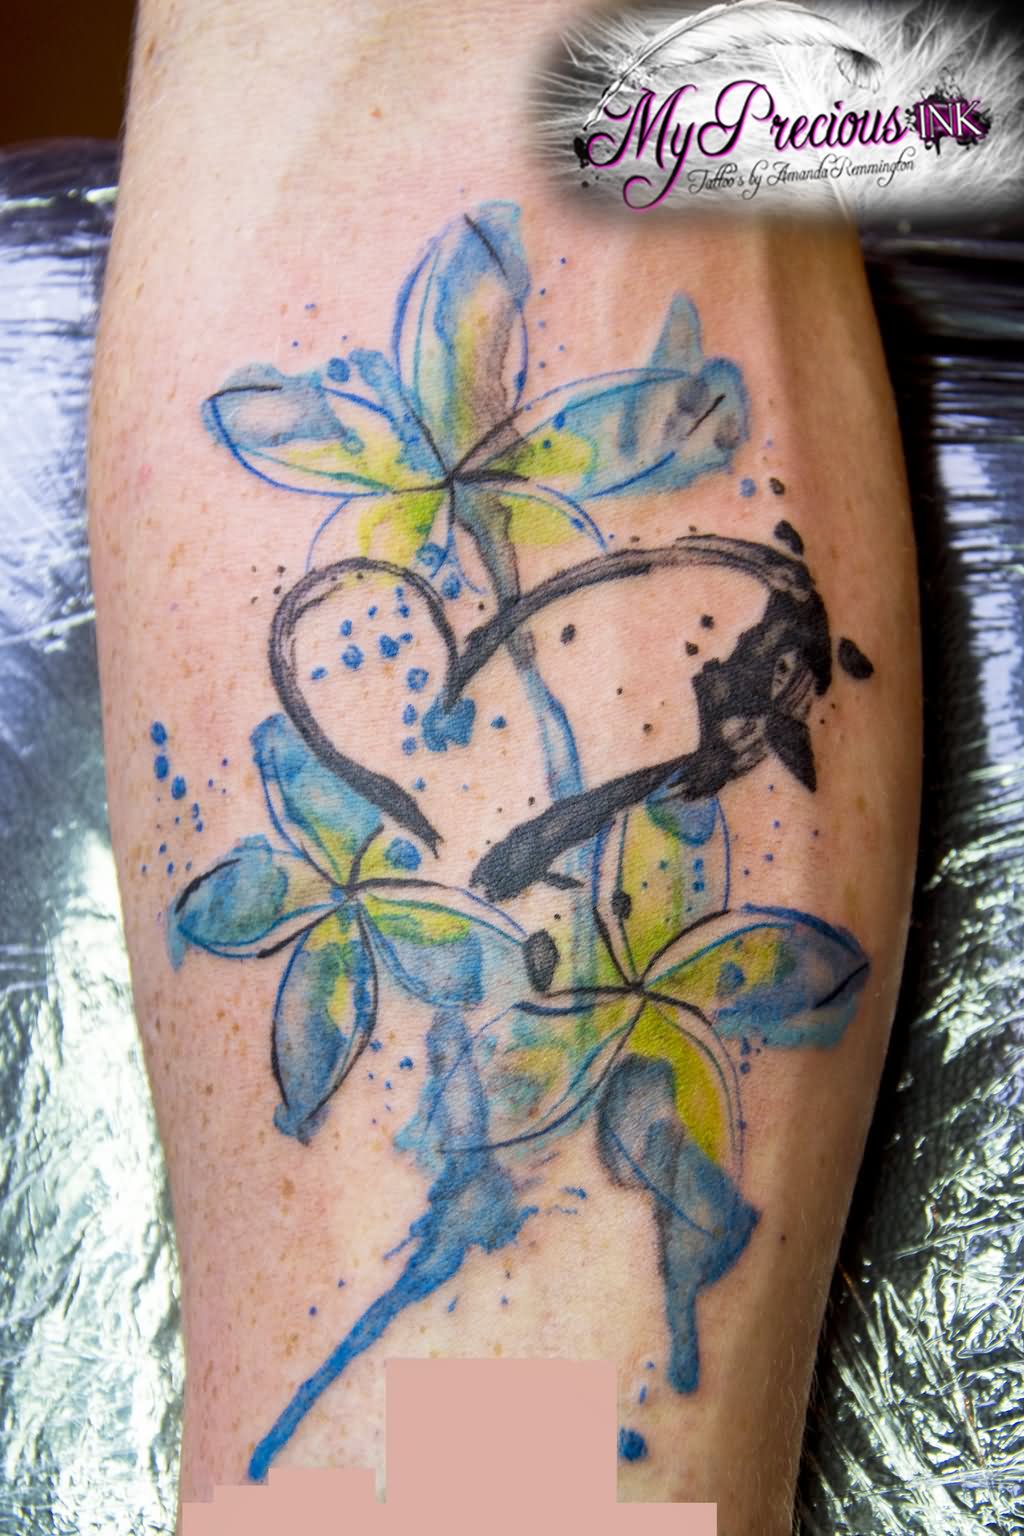 Watercolor Flowers With Heart Tattoo Design For Forearm By Mentjuh